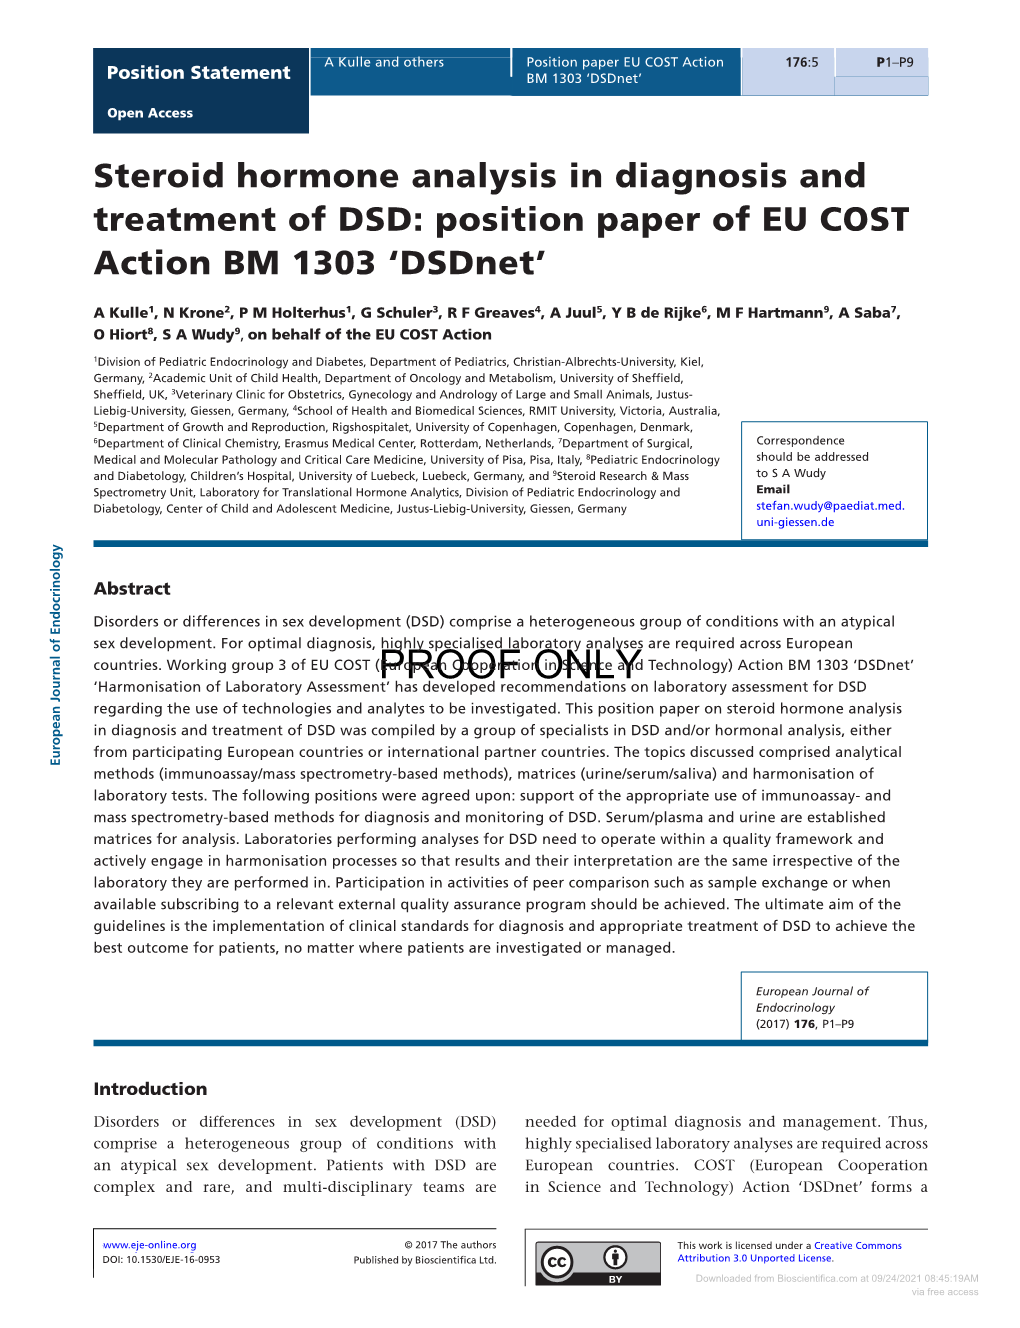 Steroid Hormone Analysis in Diagnosis and Treatment of DSD: Position Paper of EU COST Action BM 1303 'Dsdnet'